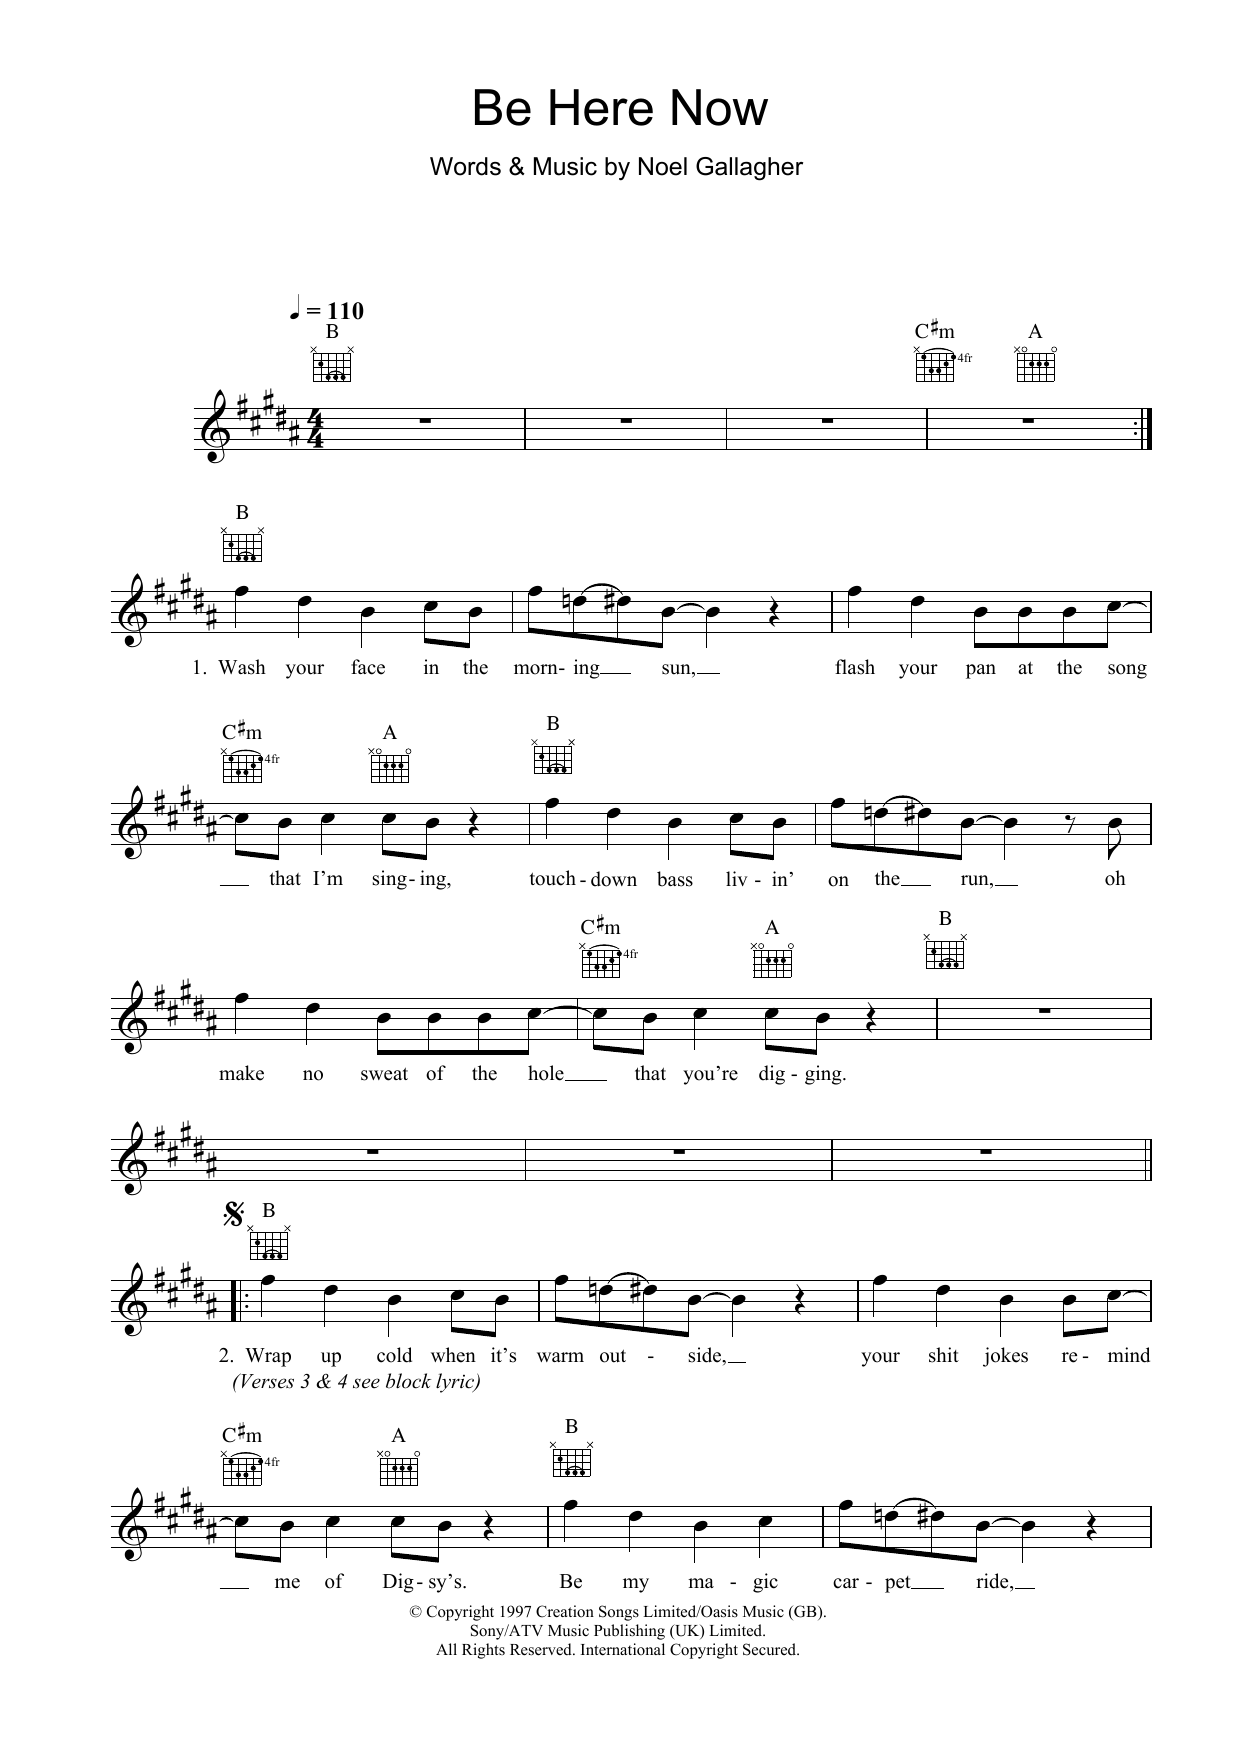 Download Oasis Be Here Now Sheet Music